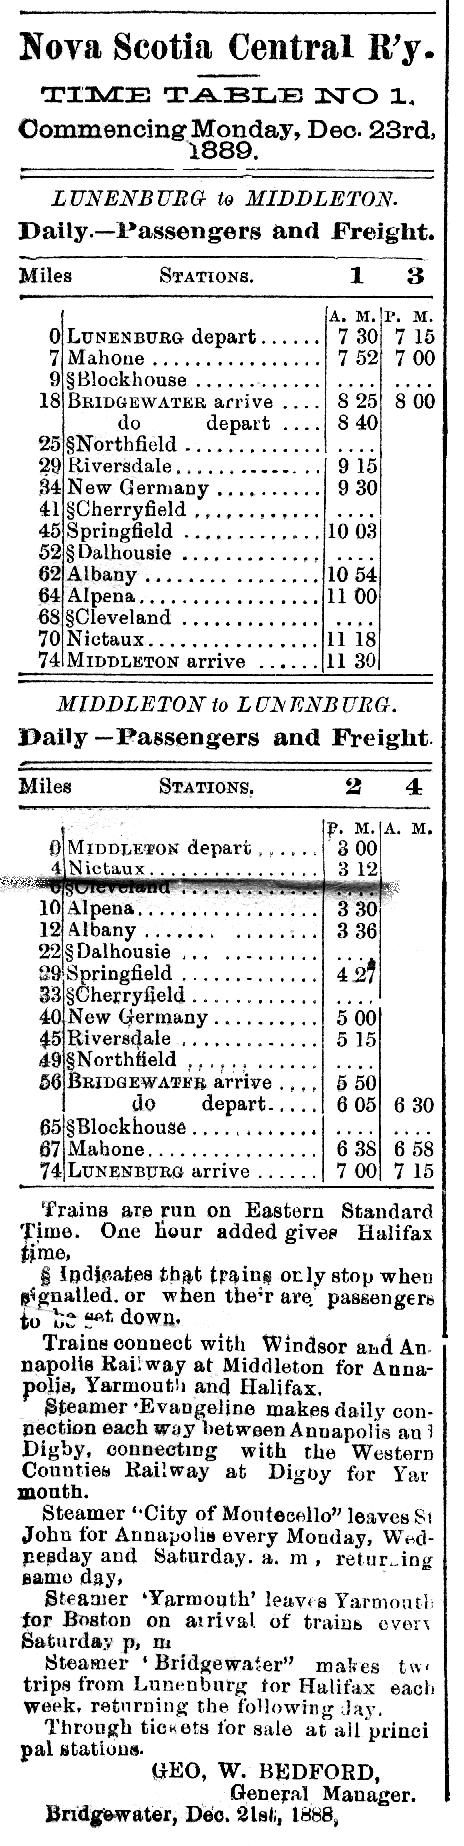 Nova Scotia Central Railway Timetable Number One